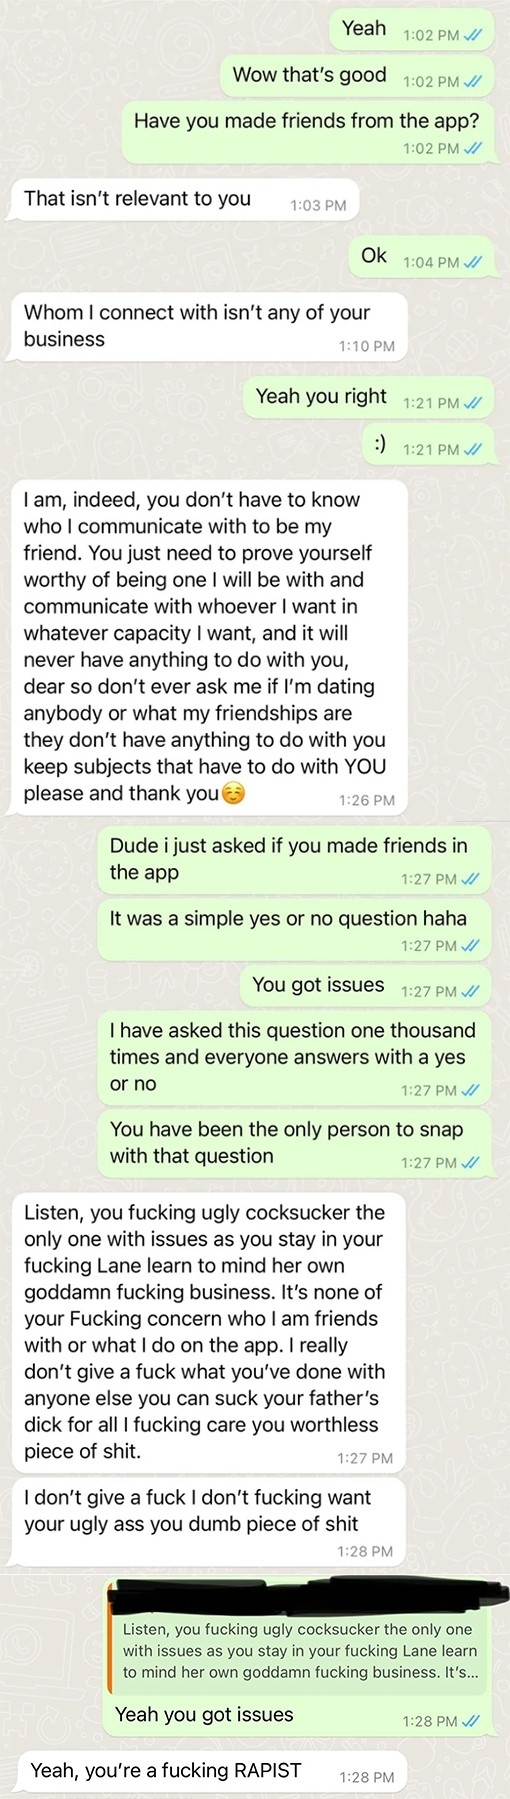 person gets angry and mean when asked if they&#x27;ve made friends through dating apps